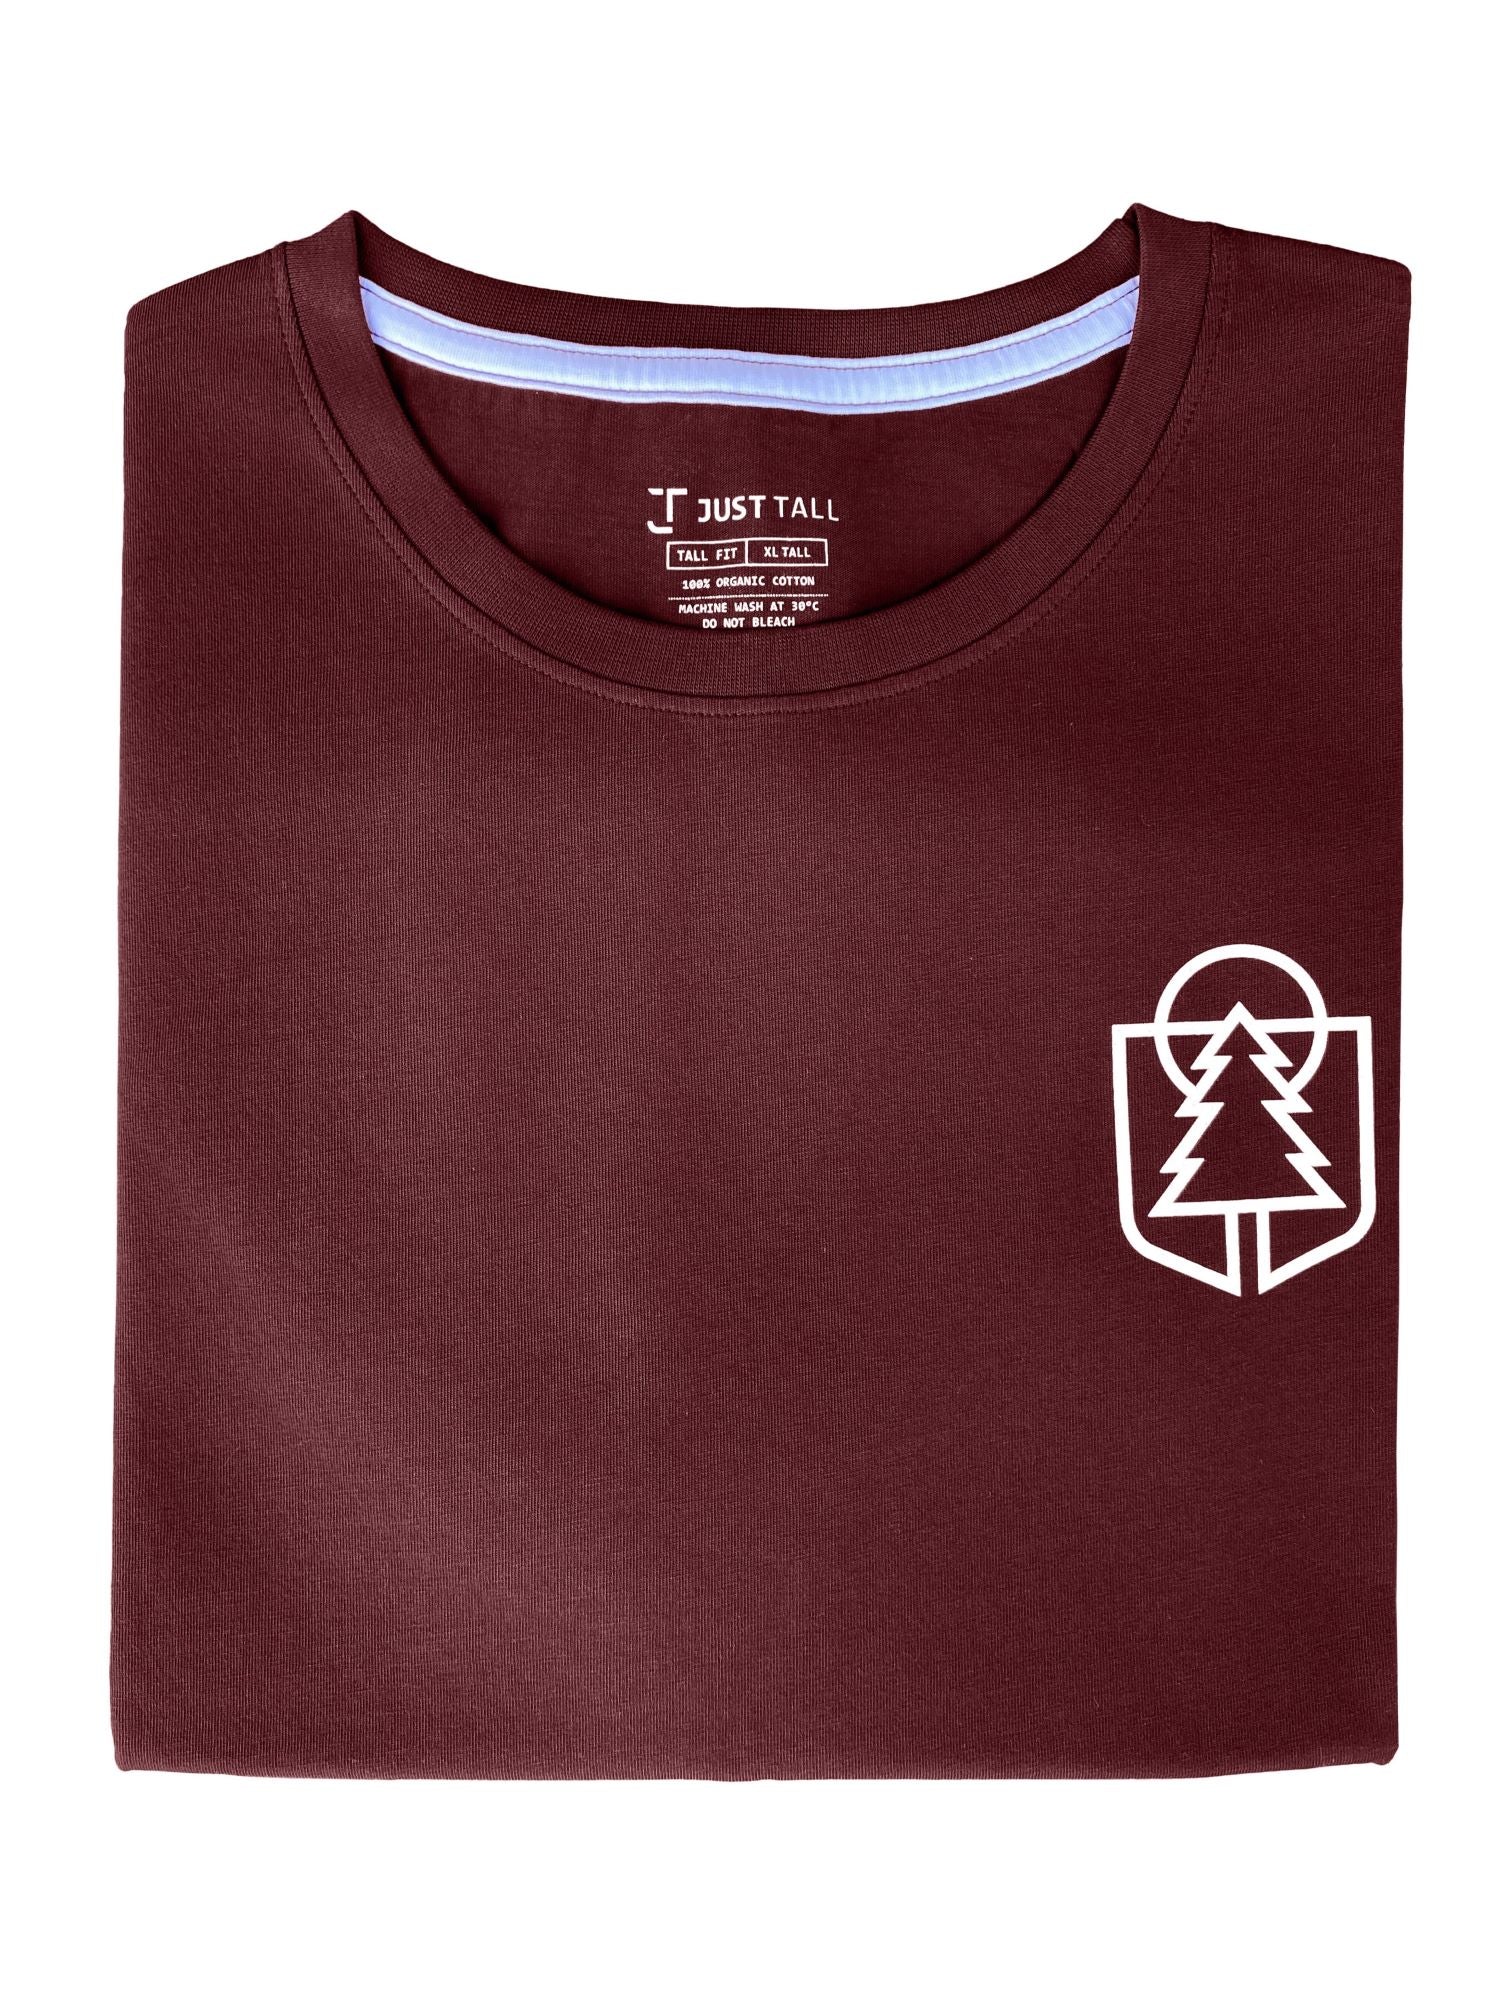 A close up of a tall maroon graphic t-shirt.